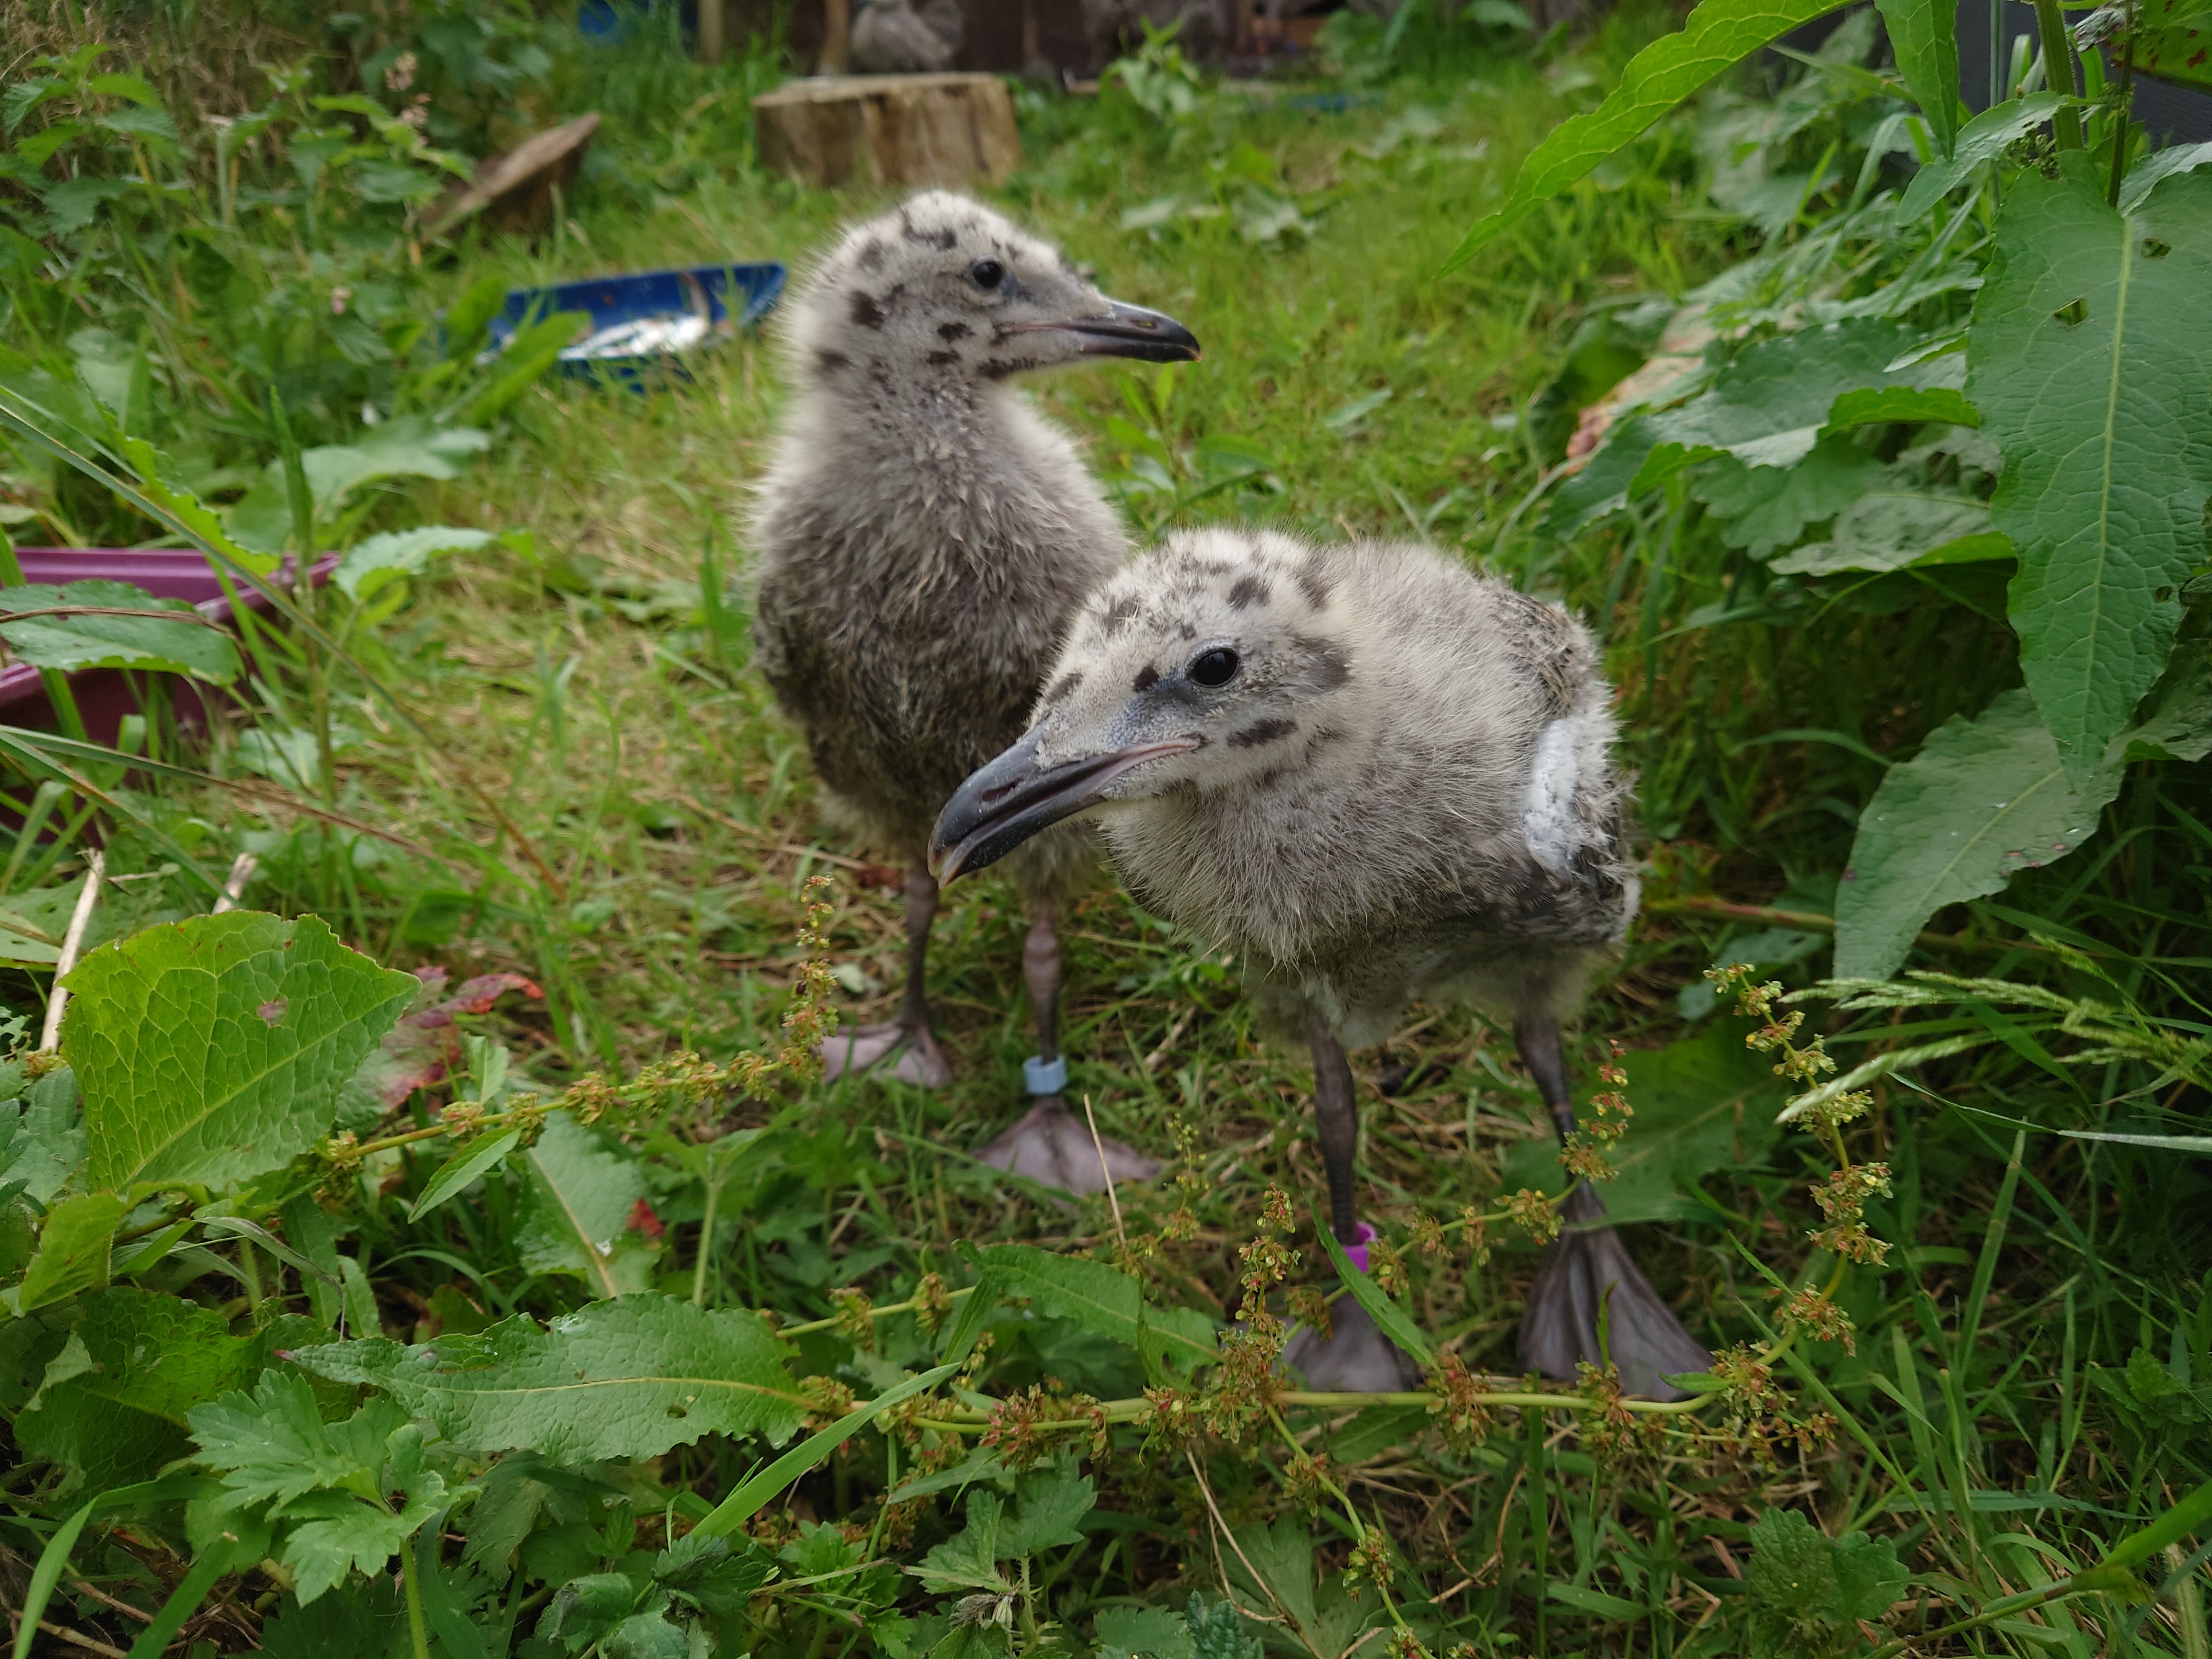 University of Exeter scientists studied herring gull chicks that had been rescued after falling off roofs (Emma Inzani/University of Exeter)